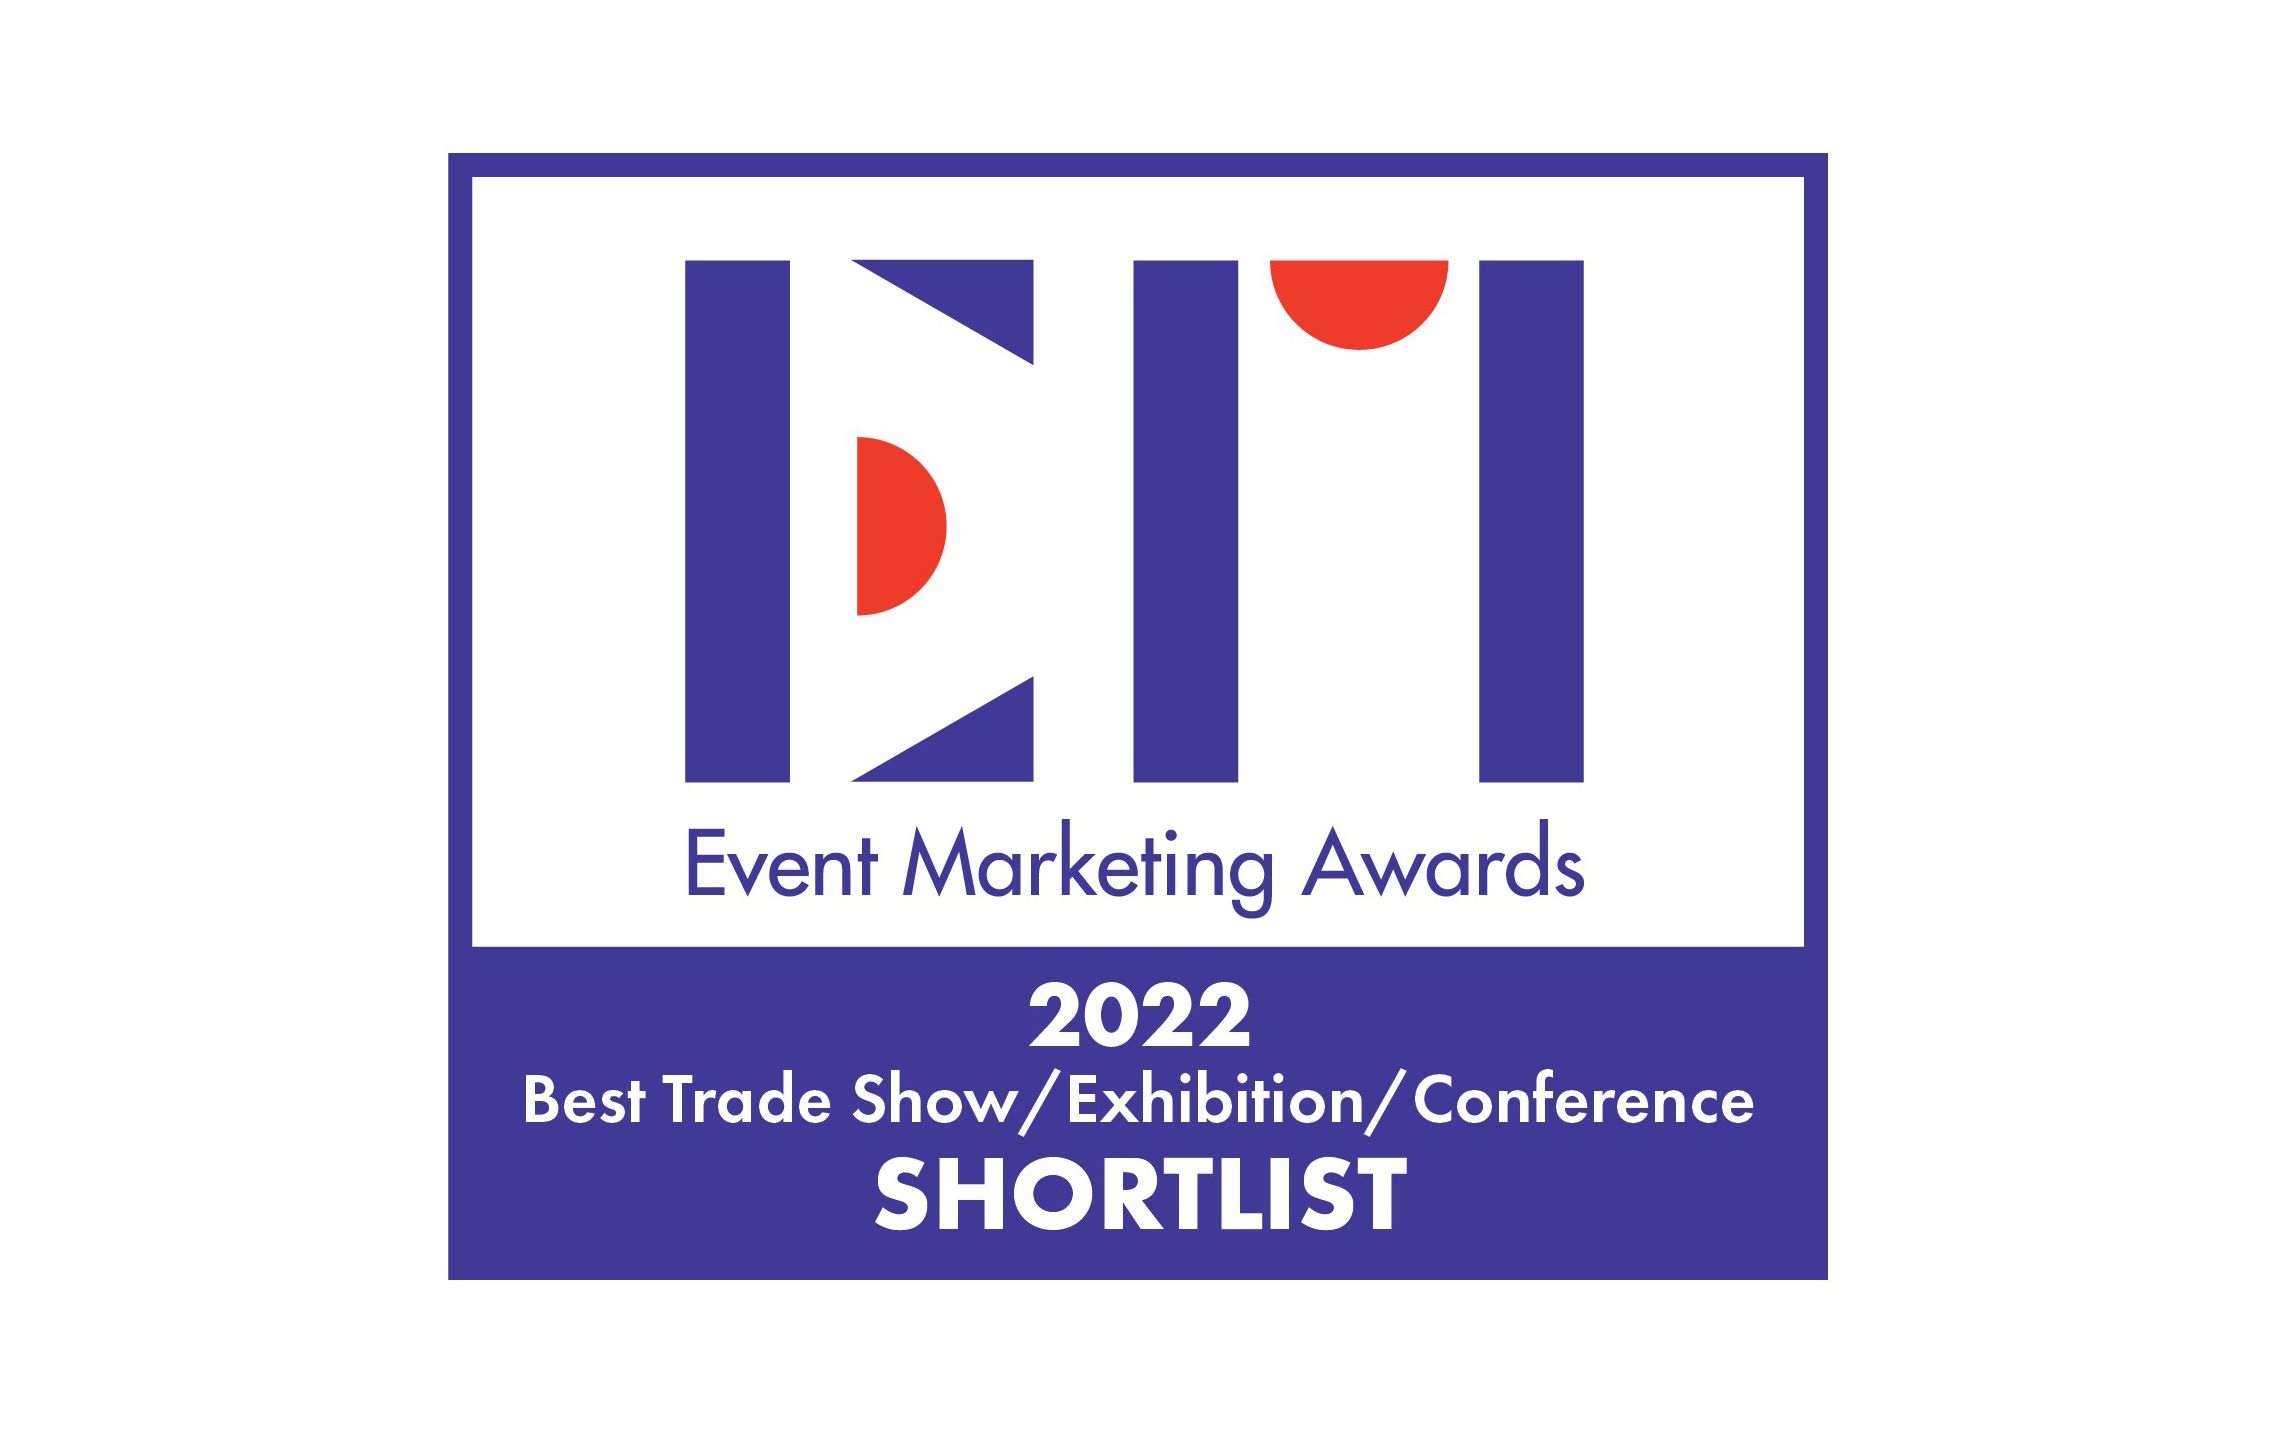 Design Shanghai has been shortlisted for the Best Trade Show/Exhibition/Conference of the Event Marketing Awards